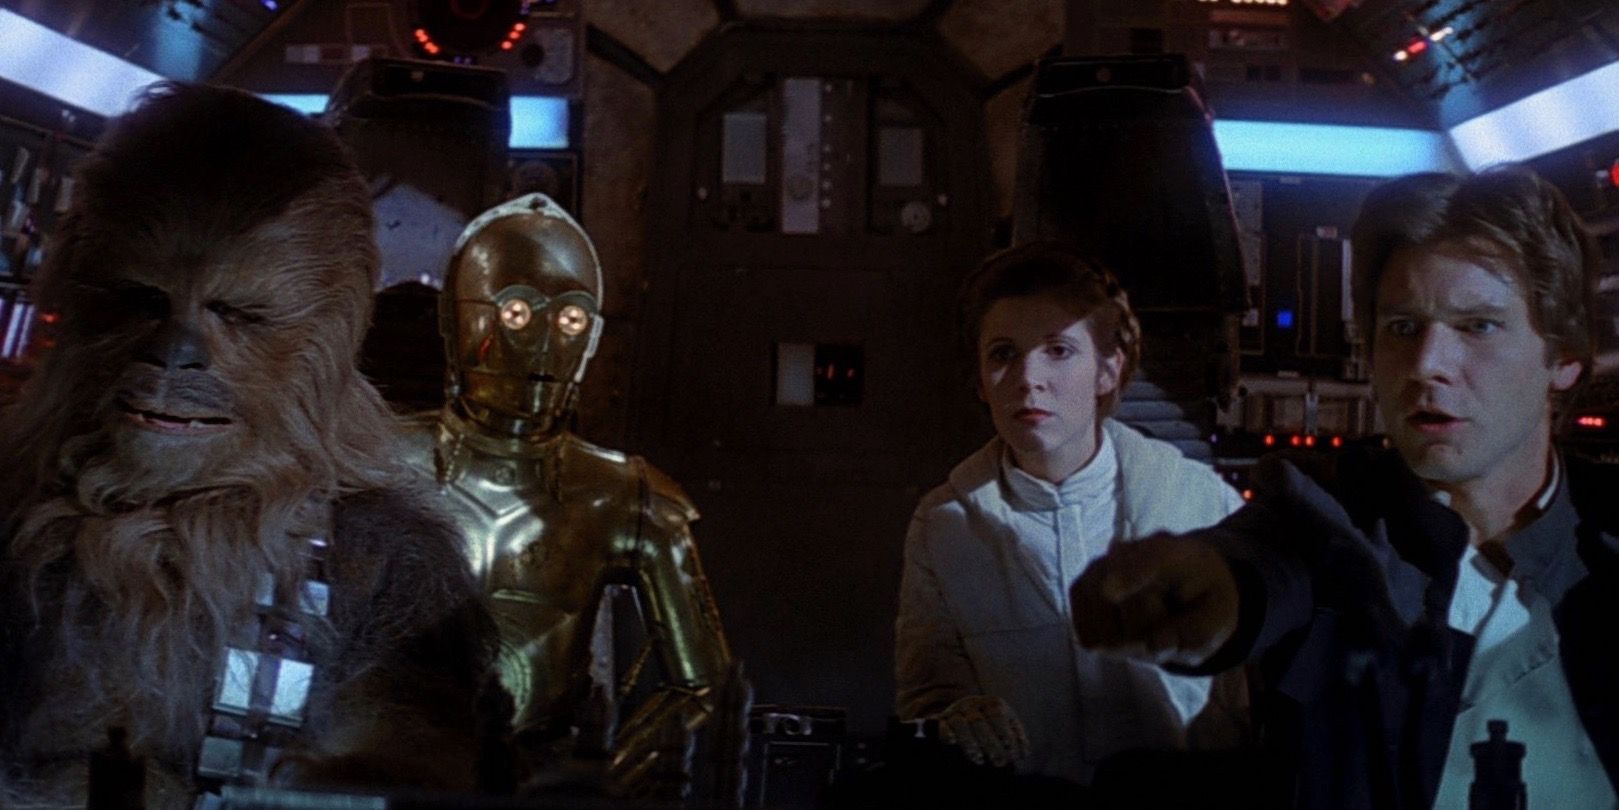 Chewbacca, C3PO, Leia, and Han Solo in Star Wars the Empire Strikes Back